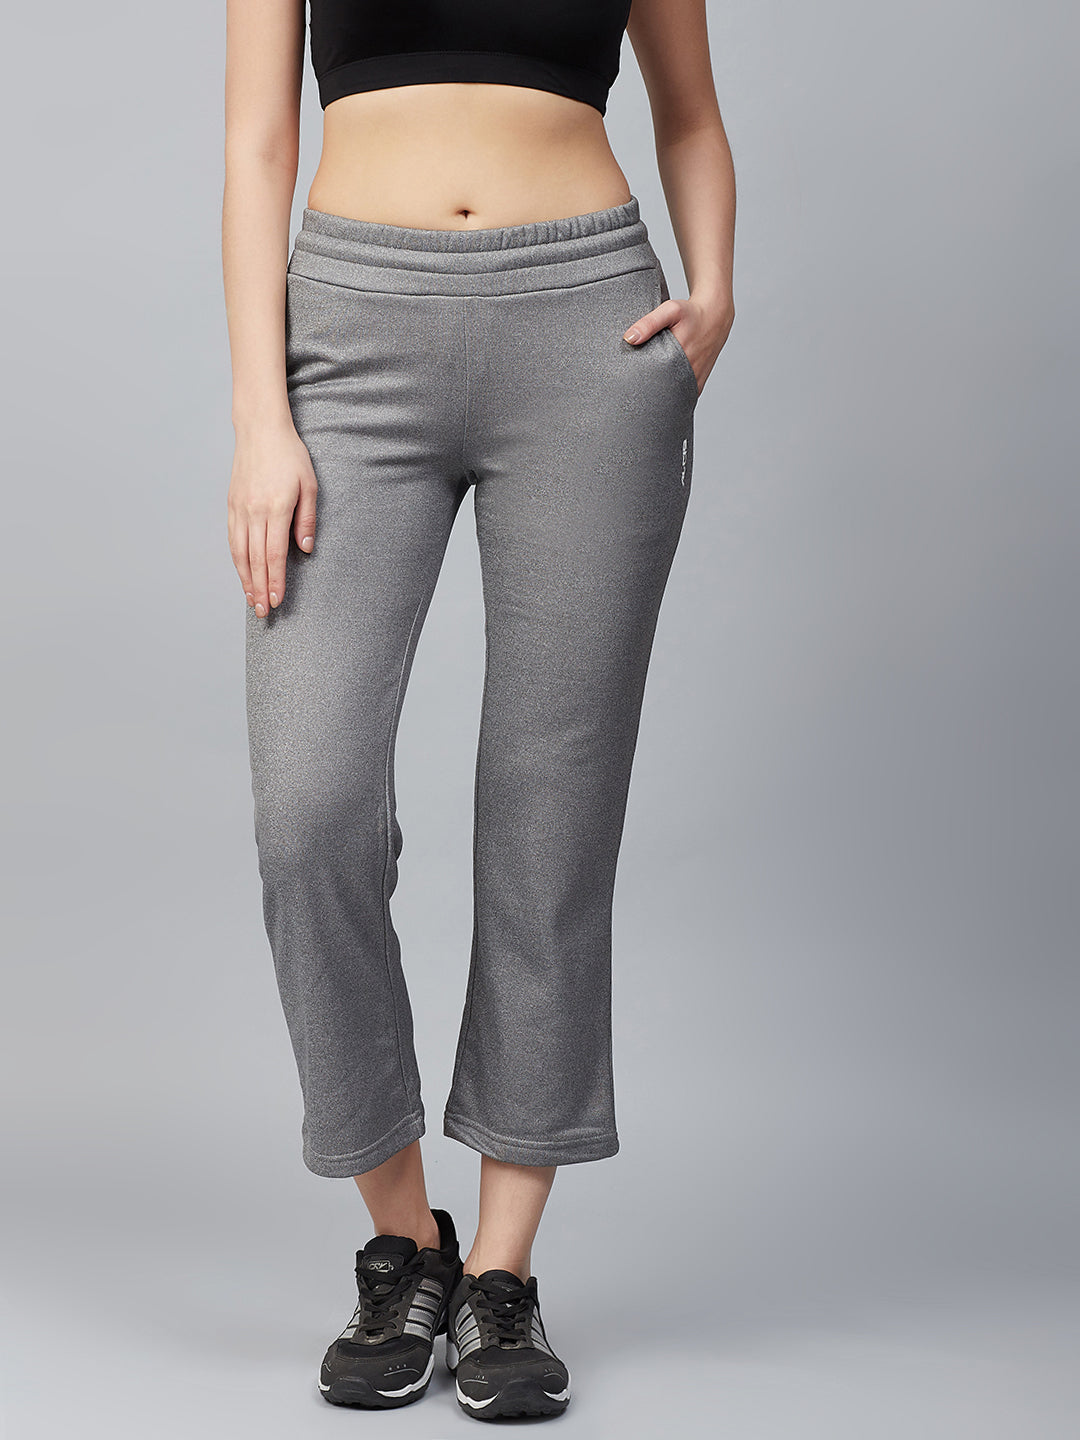 Alcis Women Grey Solid Cropped Track Pants ALWSTPN02002-S